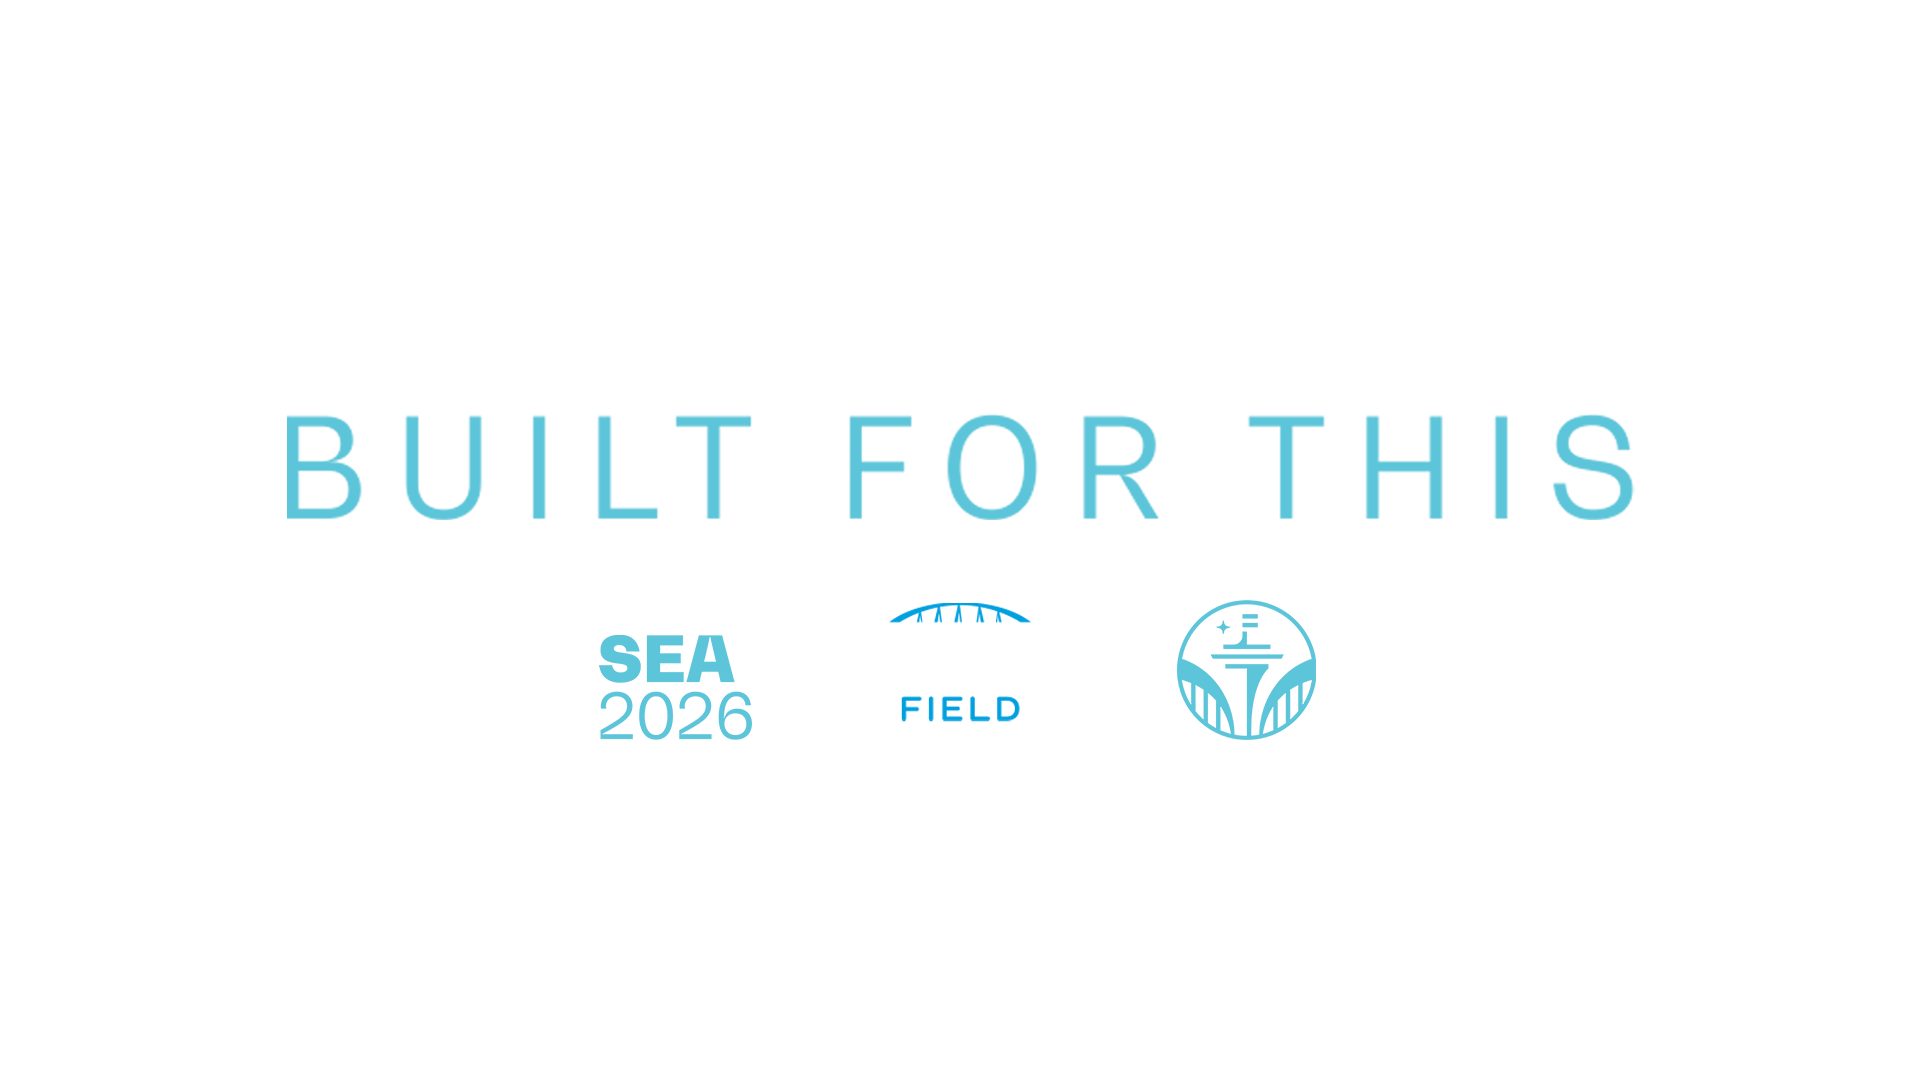 FIFA World Cup 2026 - Built For This - SEA 2026 & Lumen Field